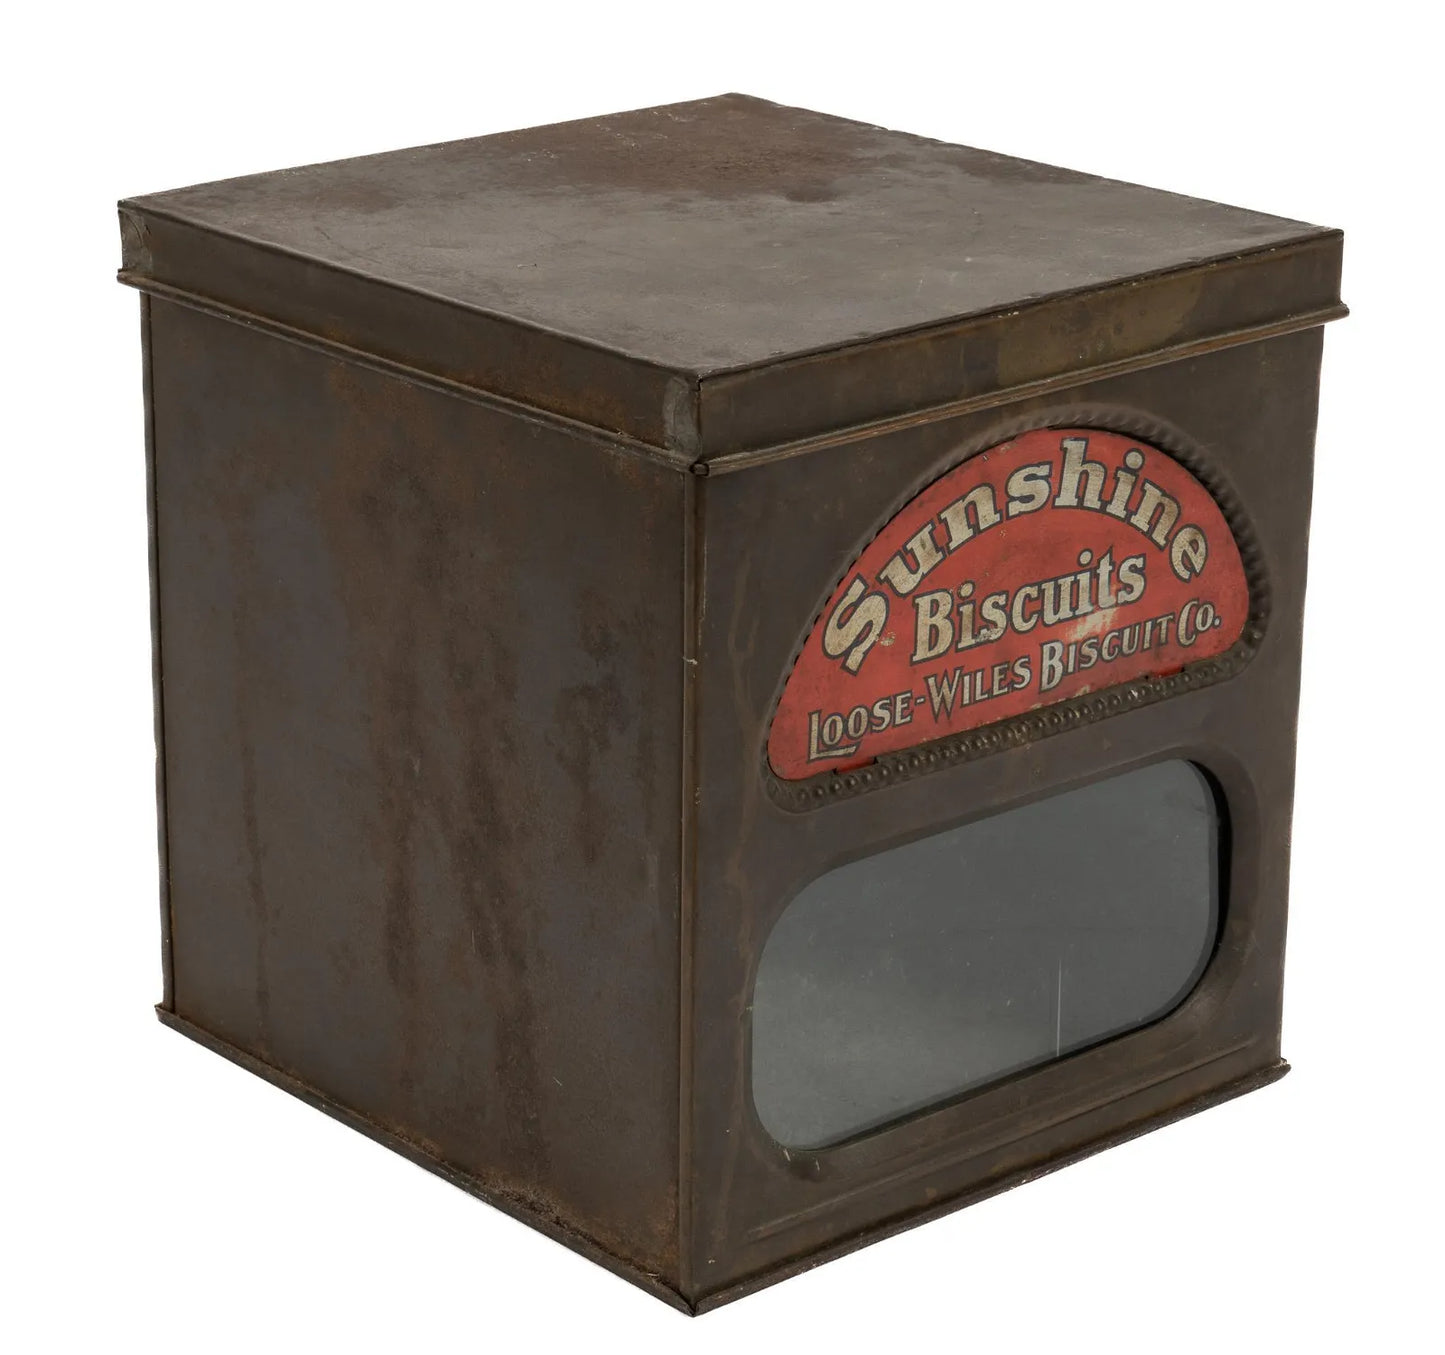 Loose-Wiles Biscuit Co. Sunshine Biscuits Tin Box